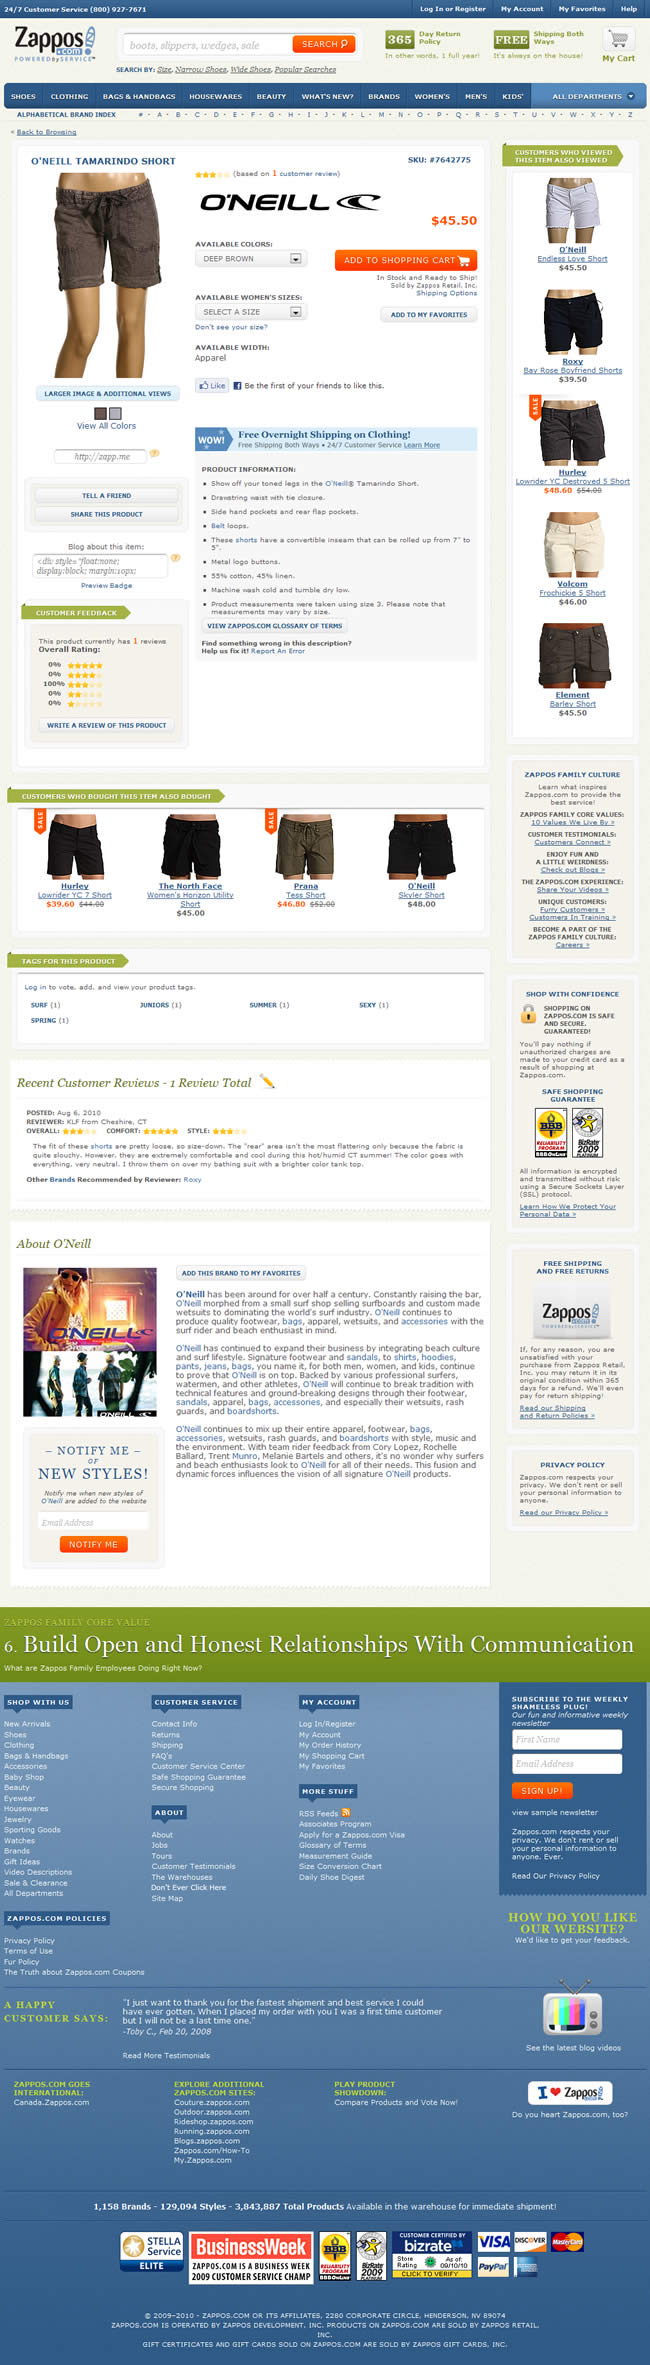 Zappos.com ecommerce product page design example